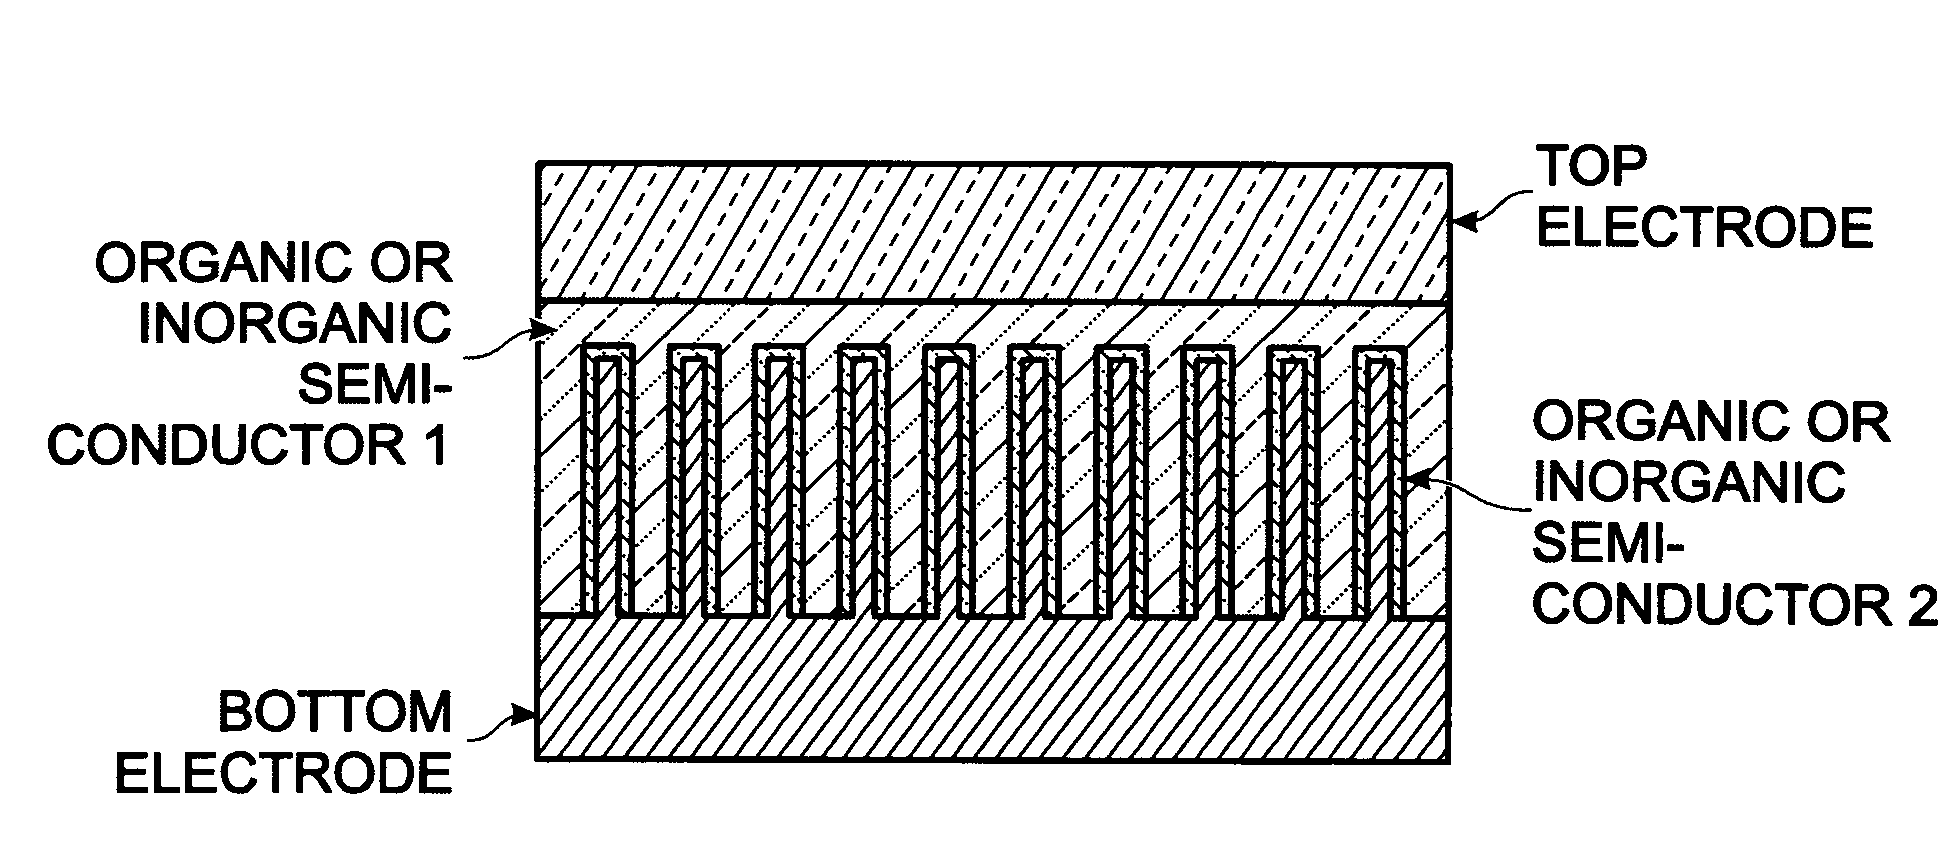 Photovoltaic structure with a conductive nanowire array electrode